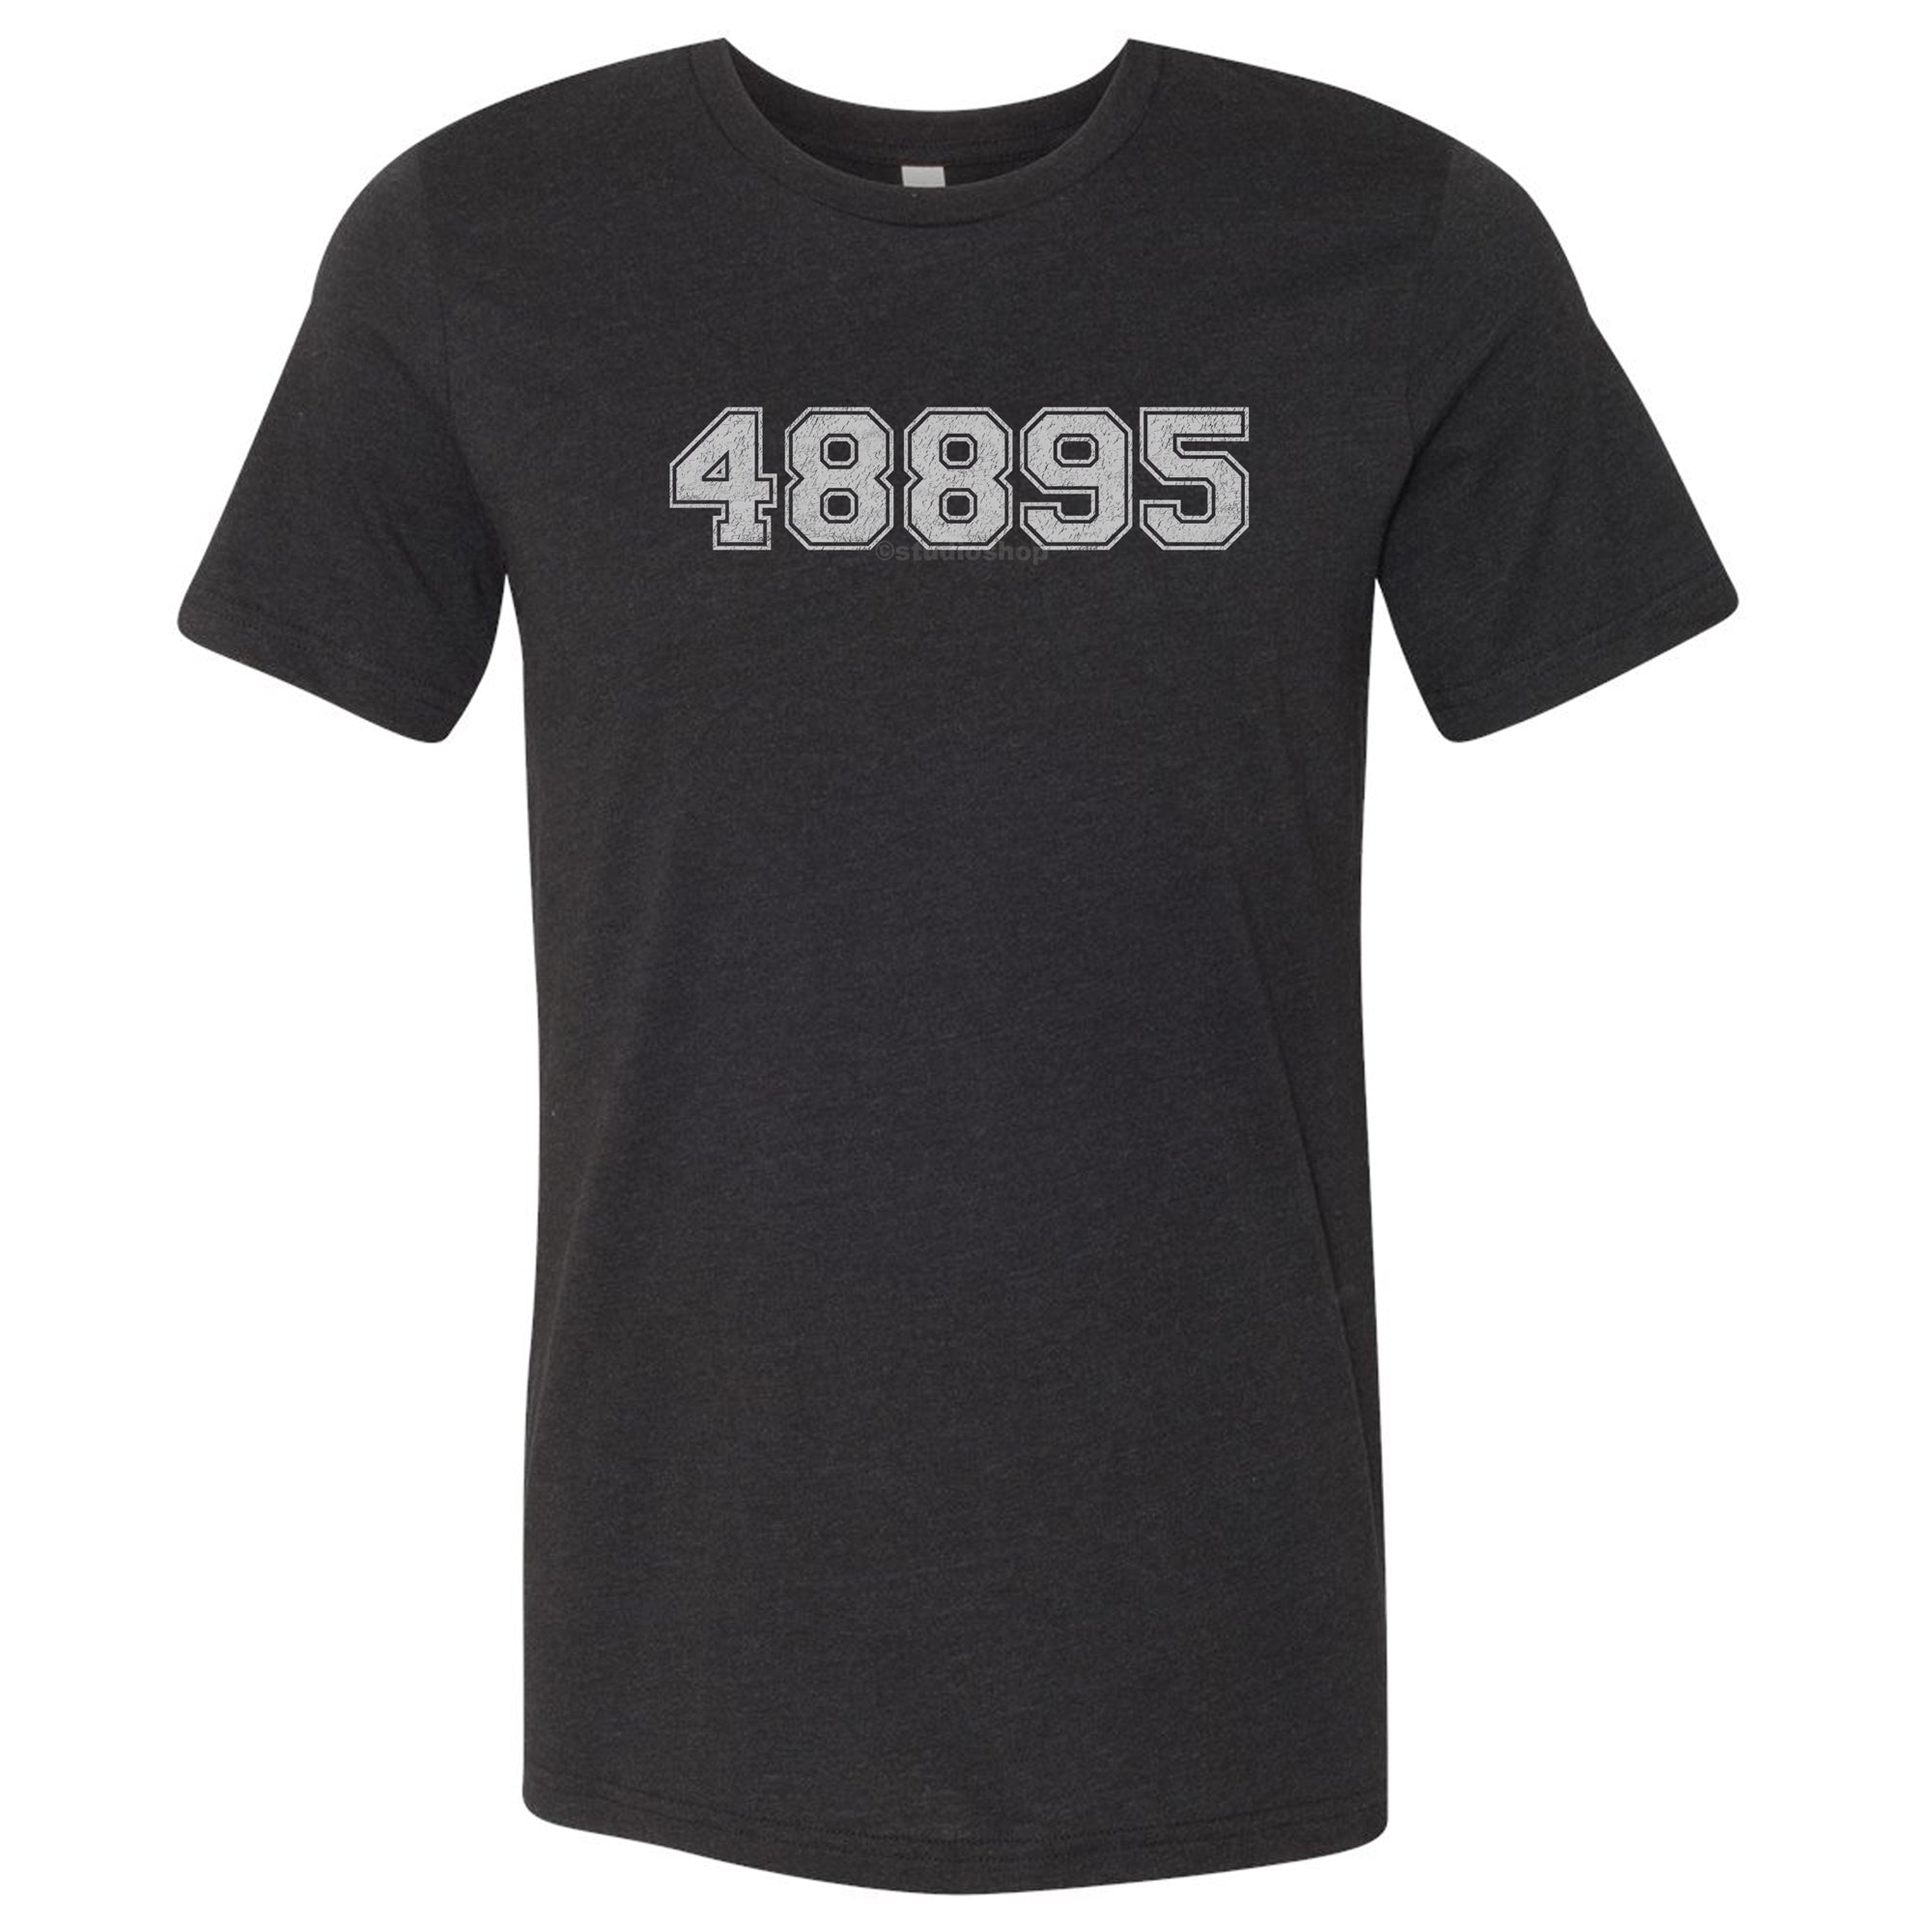 "48895" - Vintage - Blended Youth Tee